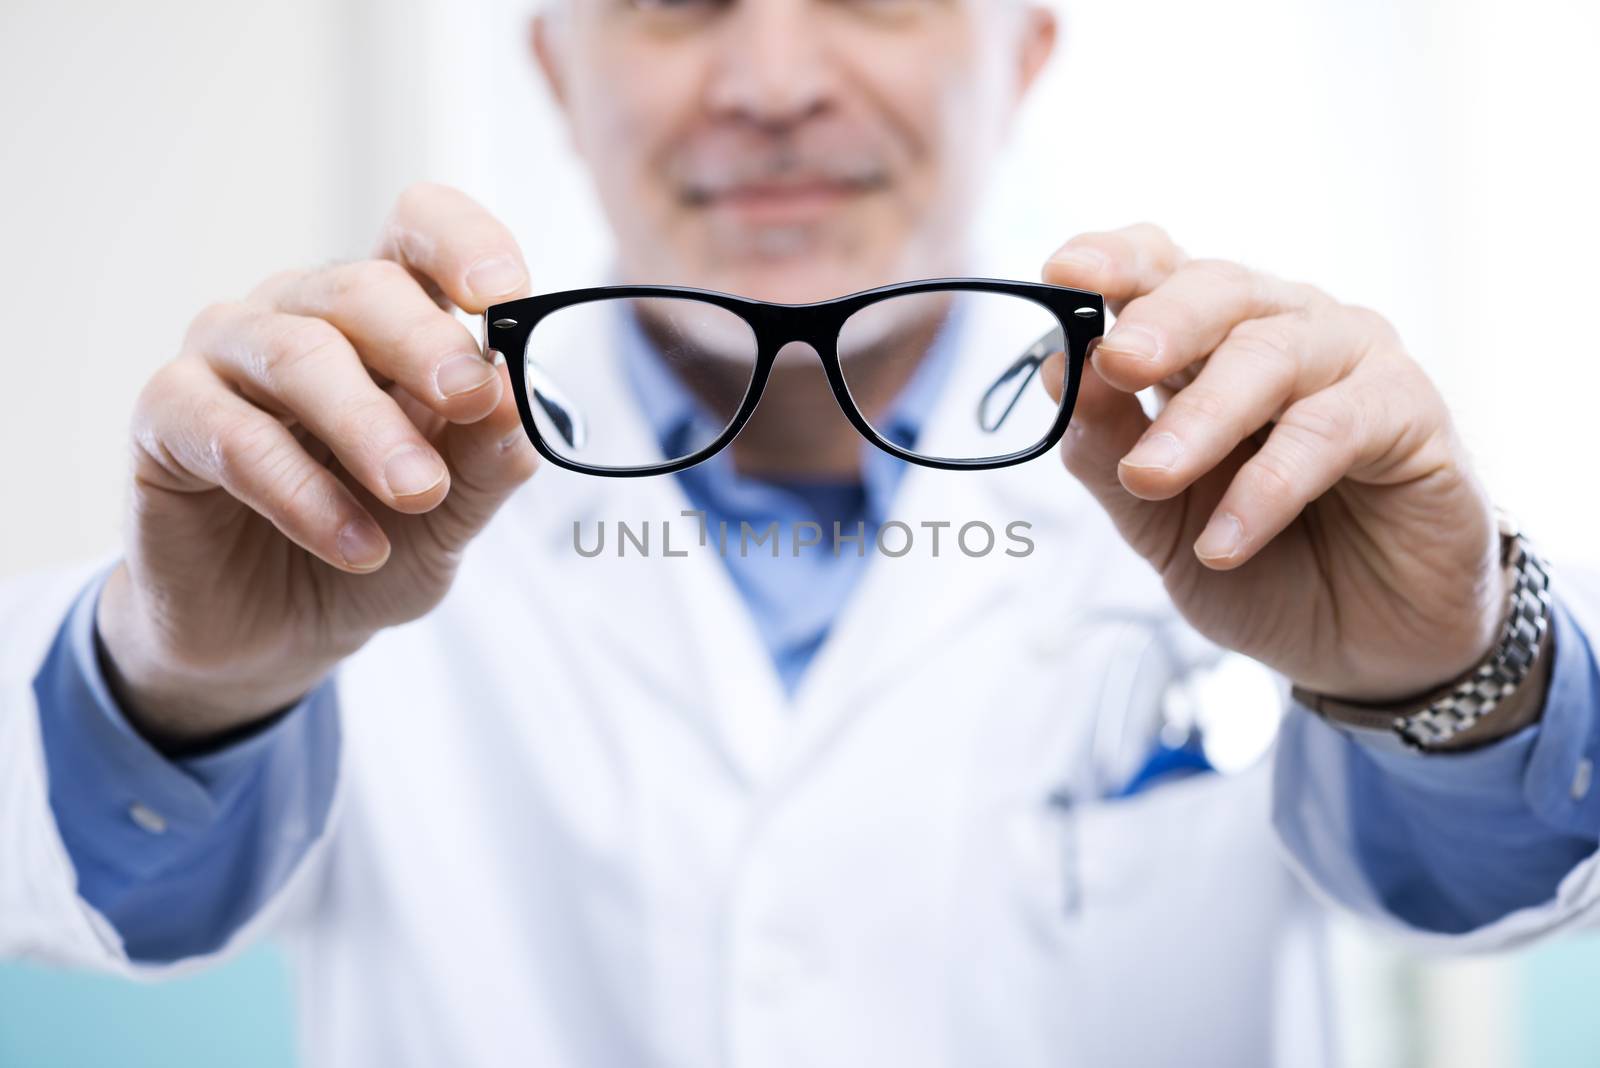 Oculist giving a pair of glasses during a visit.